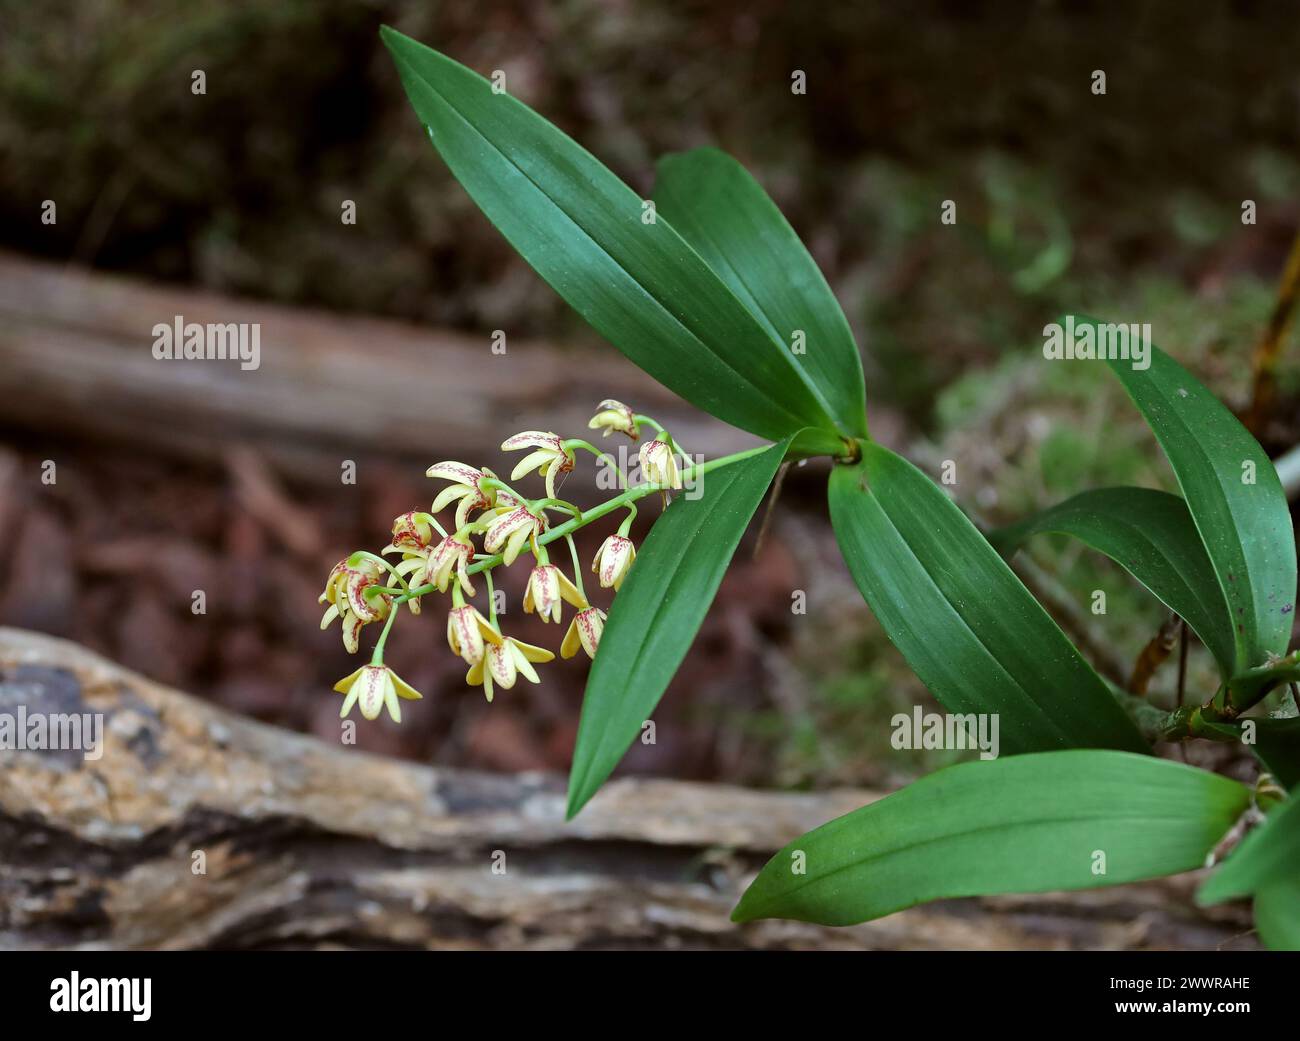 Blotched Cane Orchid or Yellow Cane Orchid, Dendrobium gracilicaule, Epidendroideae, Orchidaceae. Stock Photo